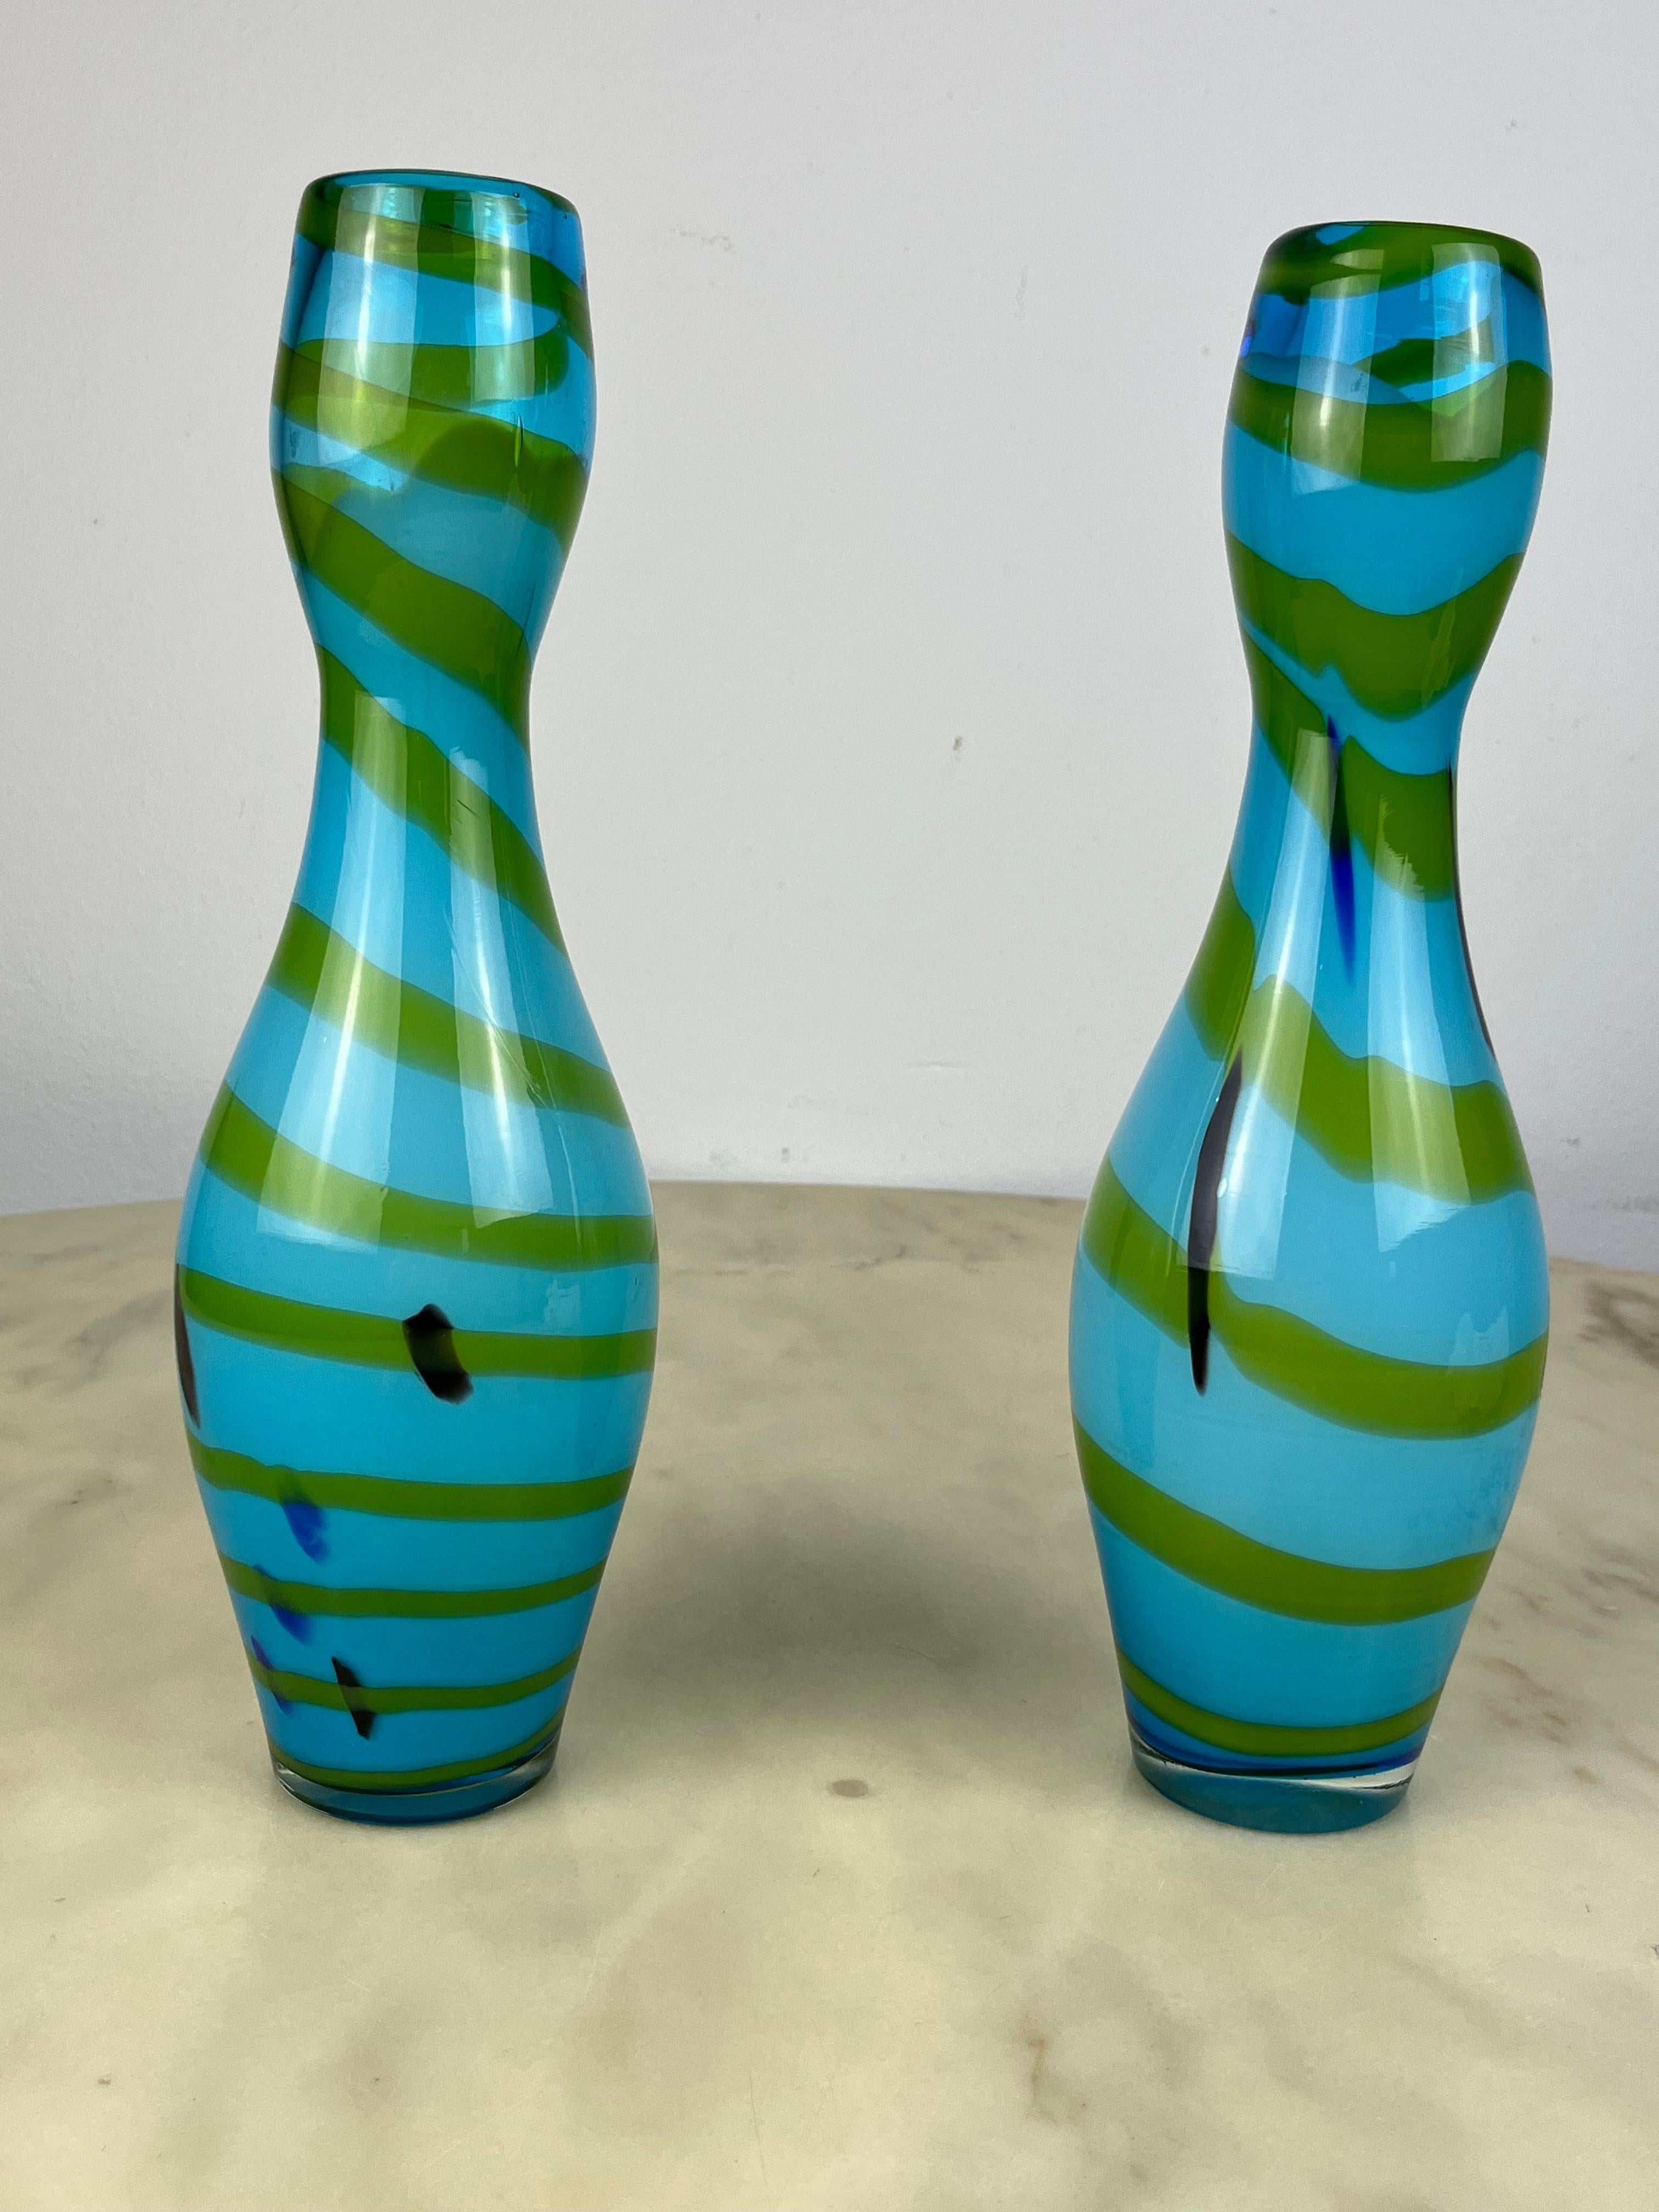 Pair of Polychrome Murano Vases Attributed To Gio Ponti 1970s For Sale 4